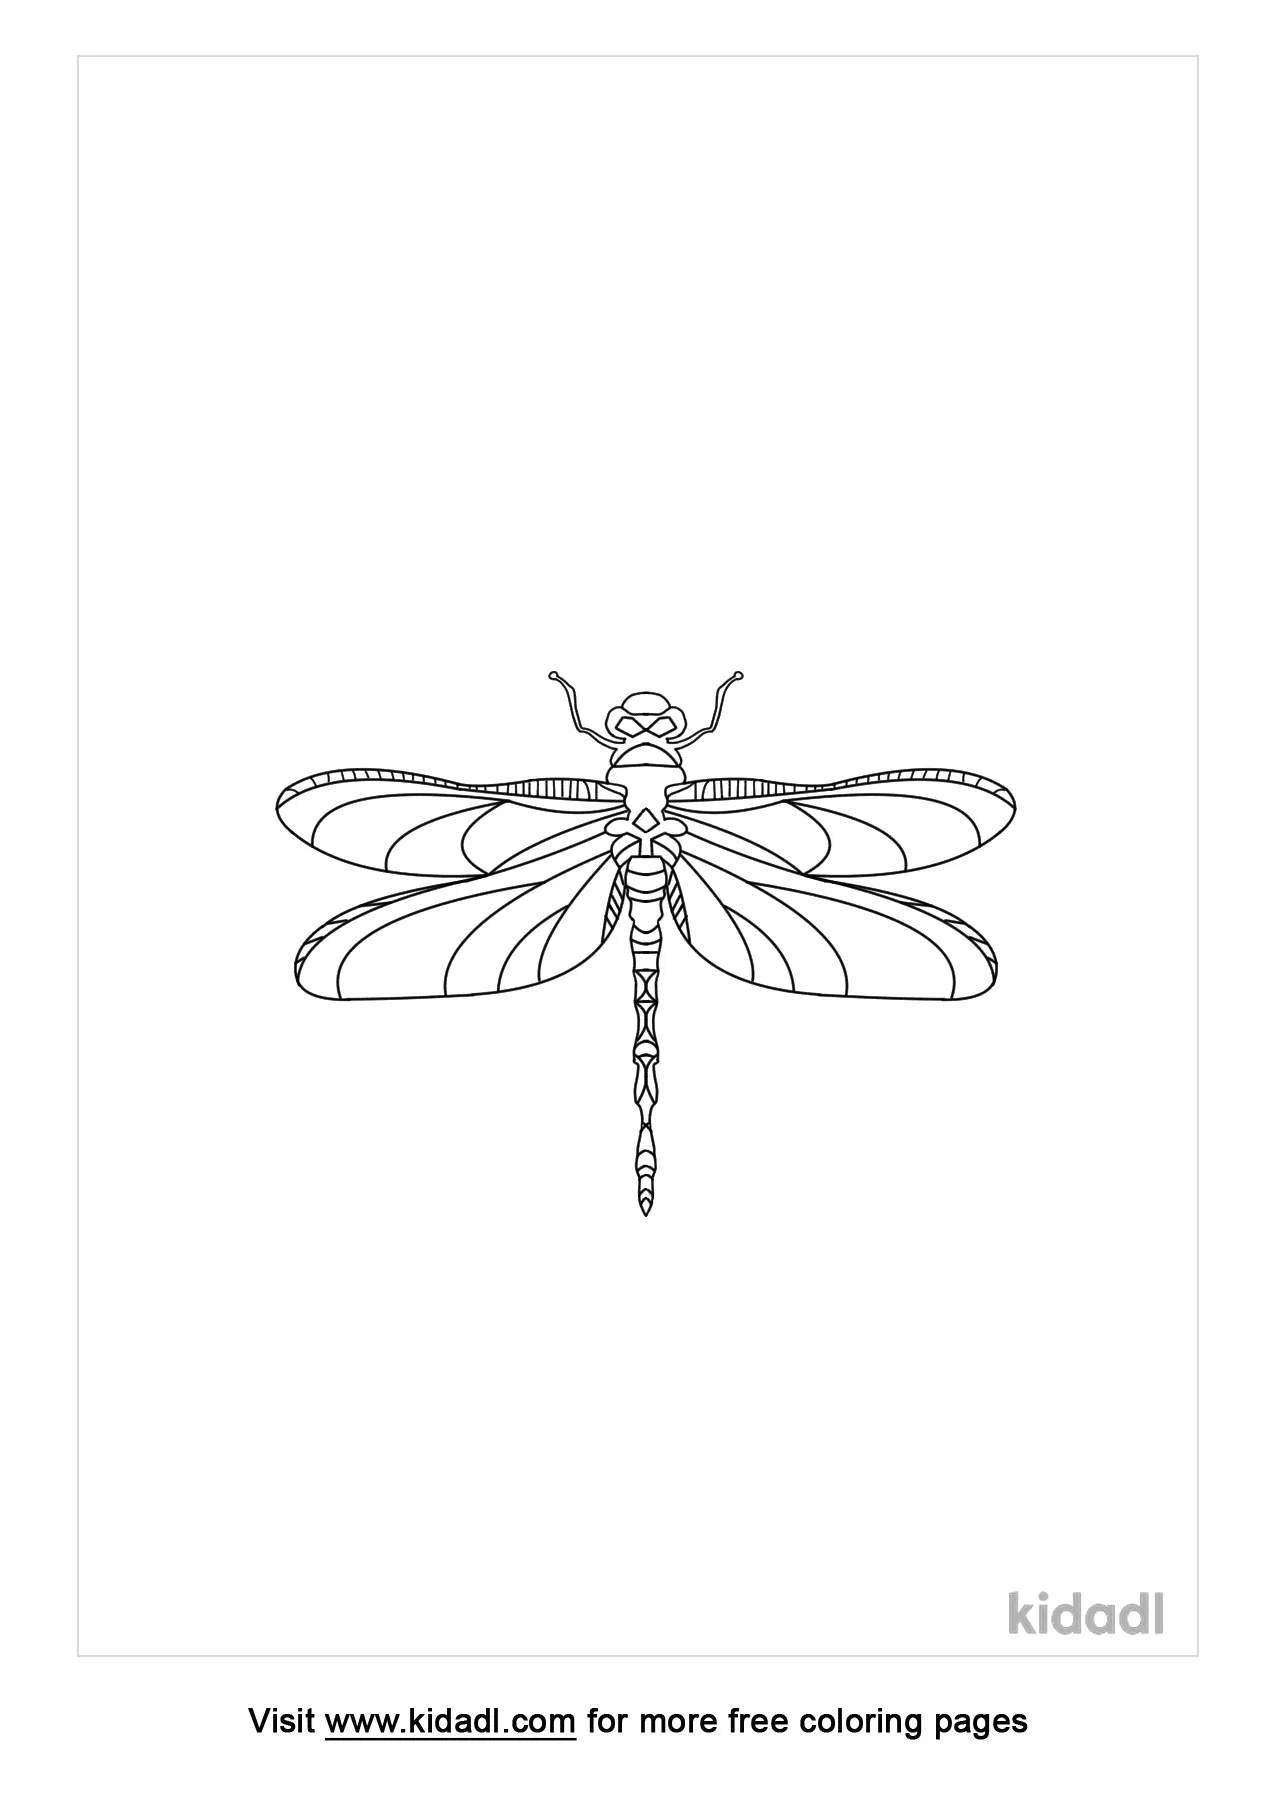 Mosaic Dragonfly Coloring Page